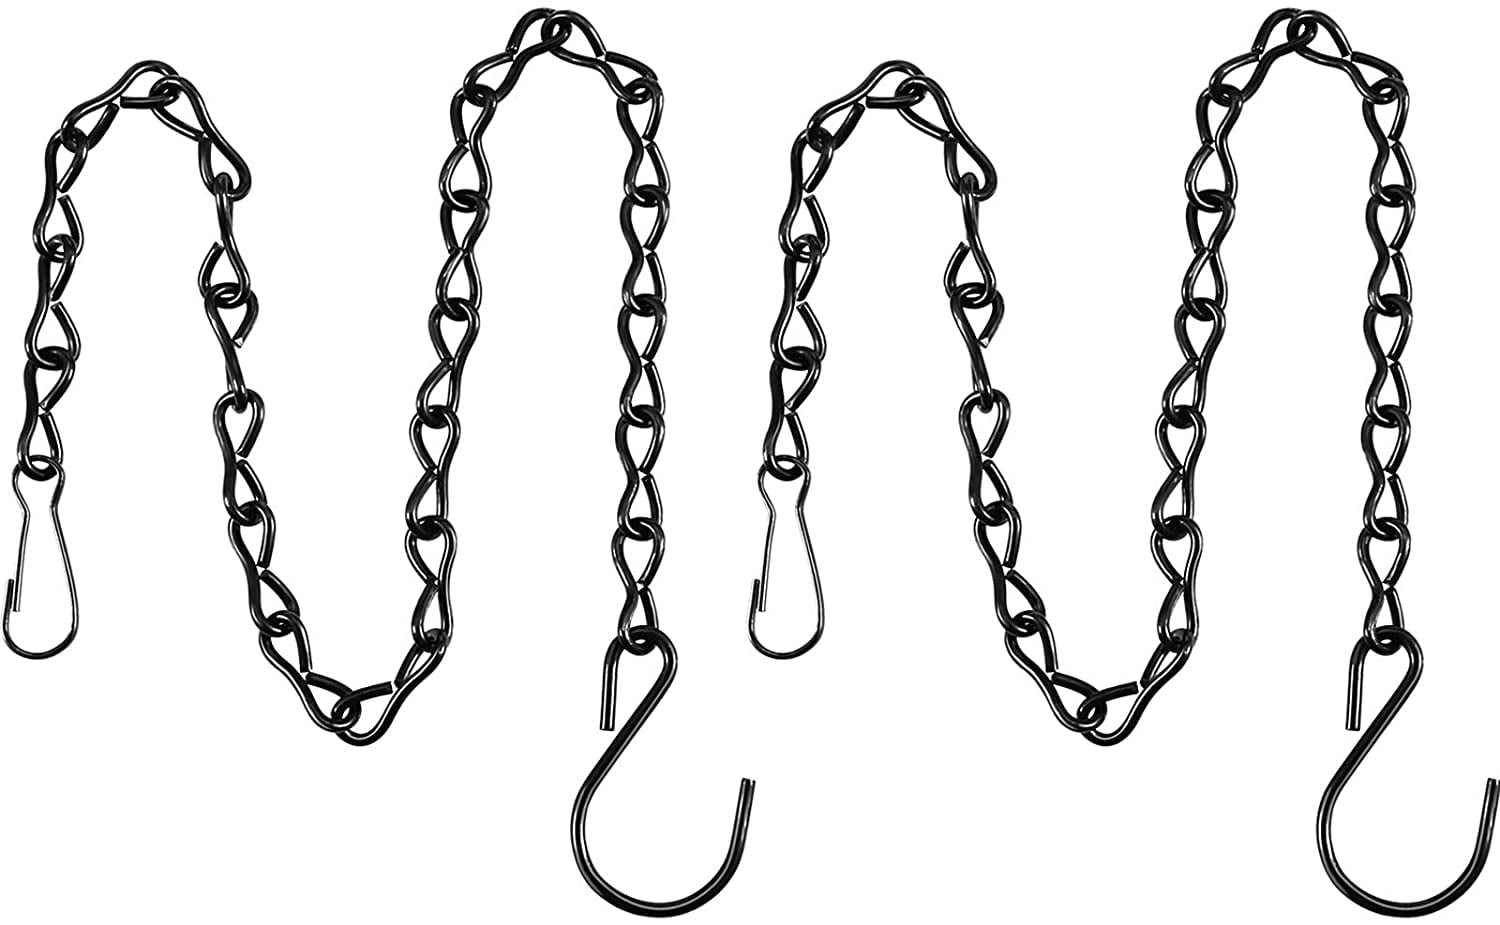 13 and35 Inch,Silver Nonemey 8 Sets Hanging Chain for Hanging Bird Feeders,Planters,Lanterns and Ornaments,Chain Hanger for Billboards and Chalkboards 